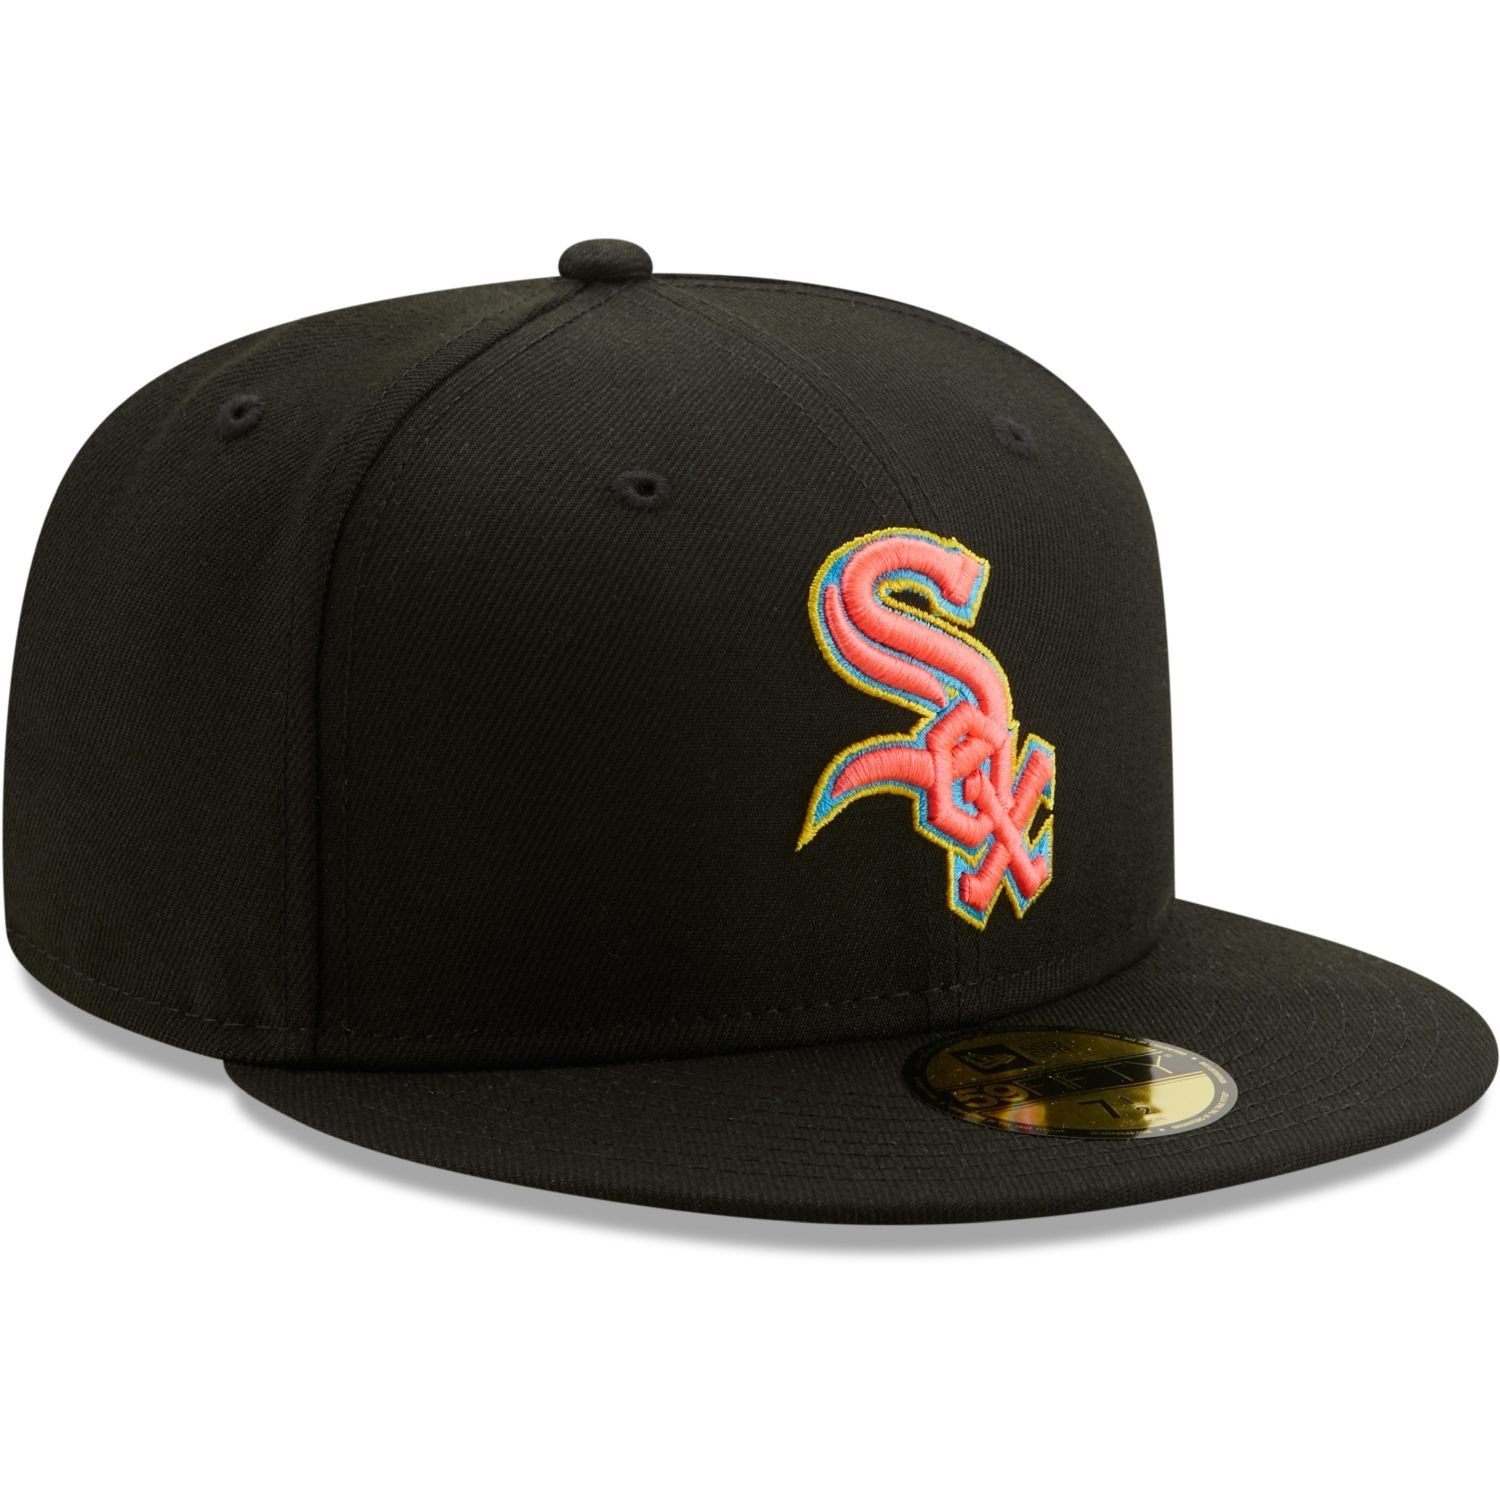 Era New White Sox 59Fifty Chicago Fitted Cap FANATIC